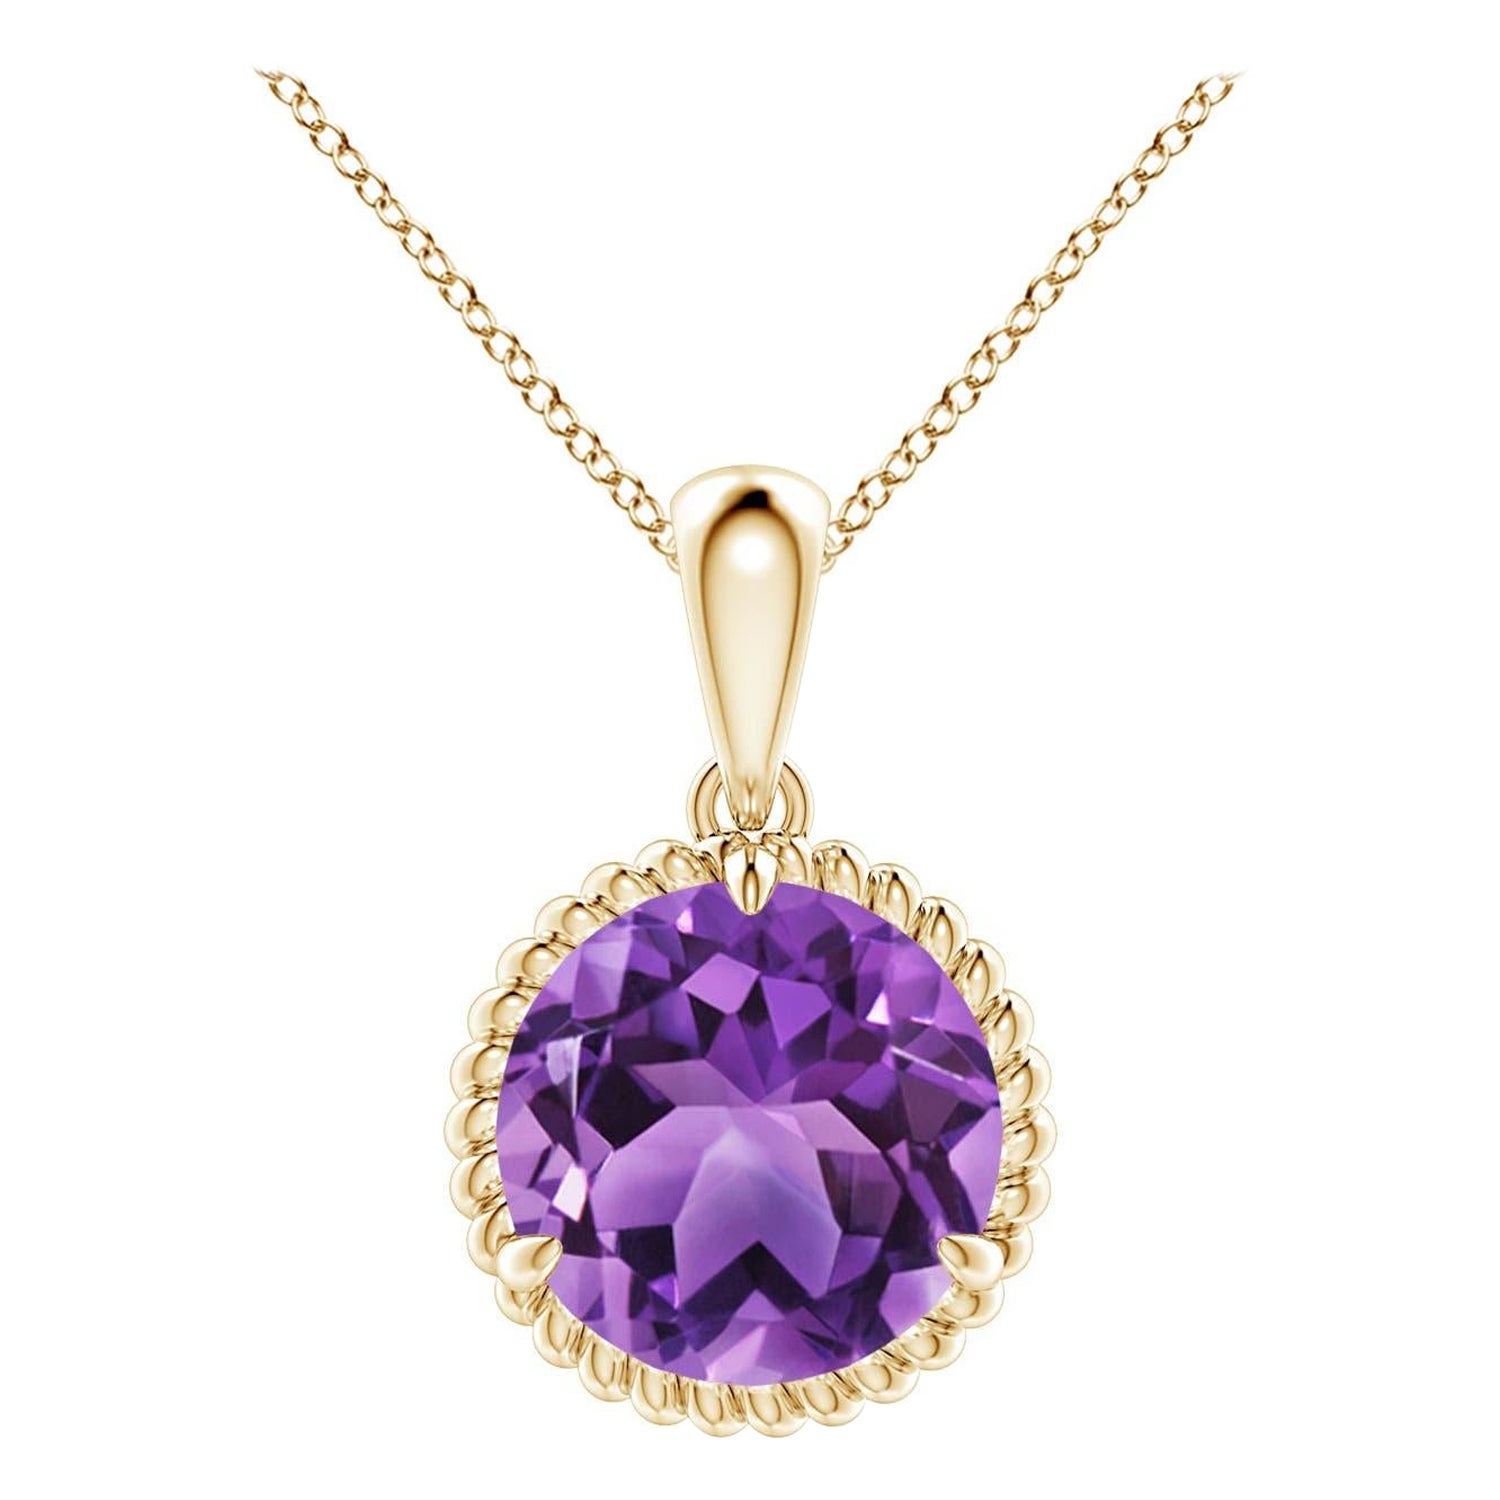 Natural Rope-Framed 2.45ct Amethyst Solitaire Pendant in 14K Yellow Gold